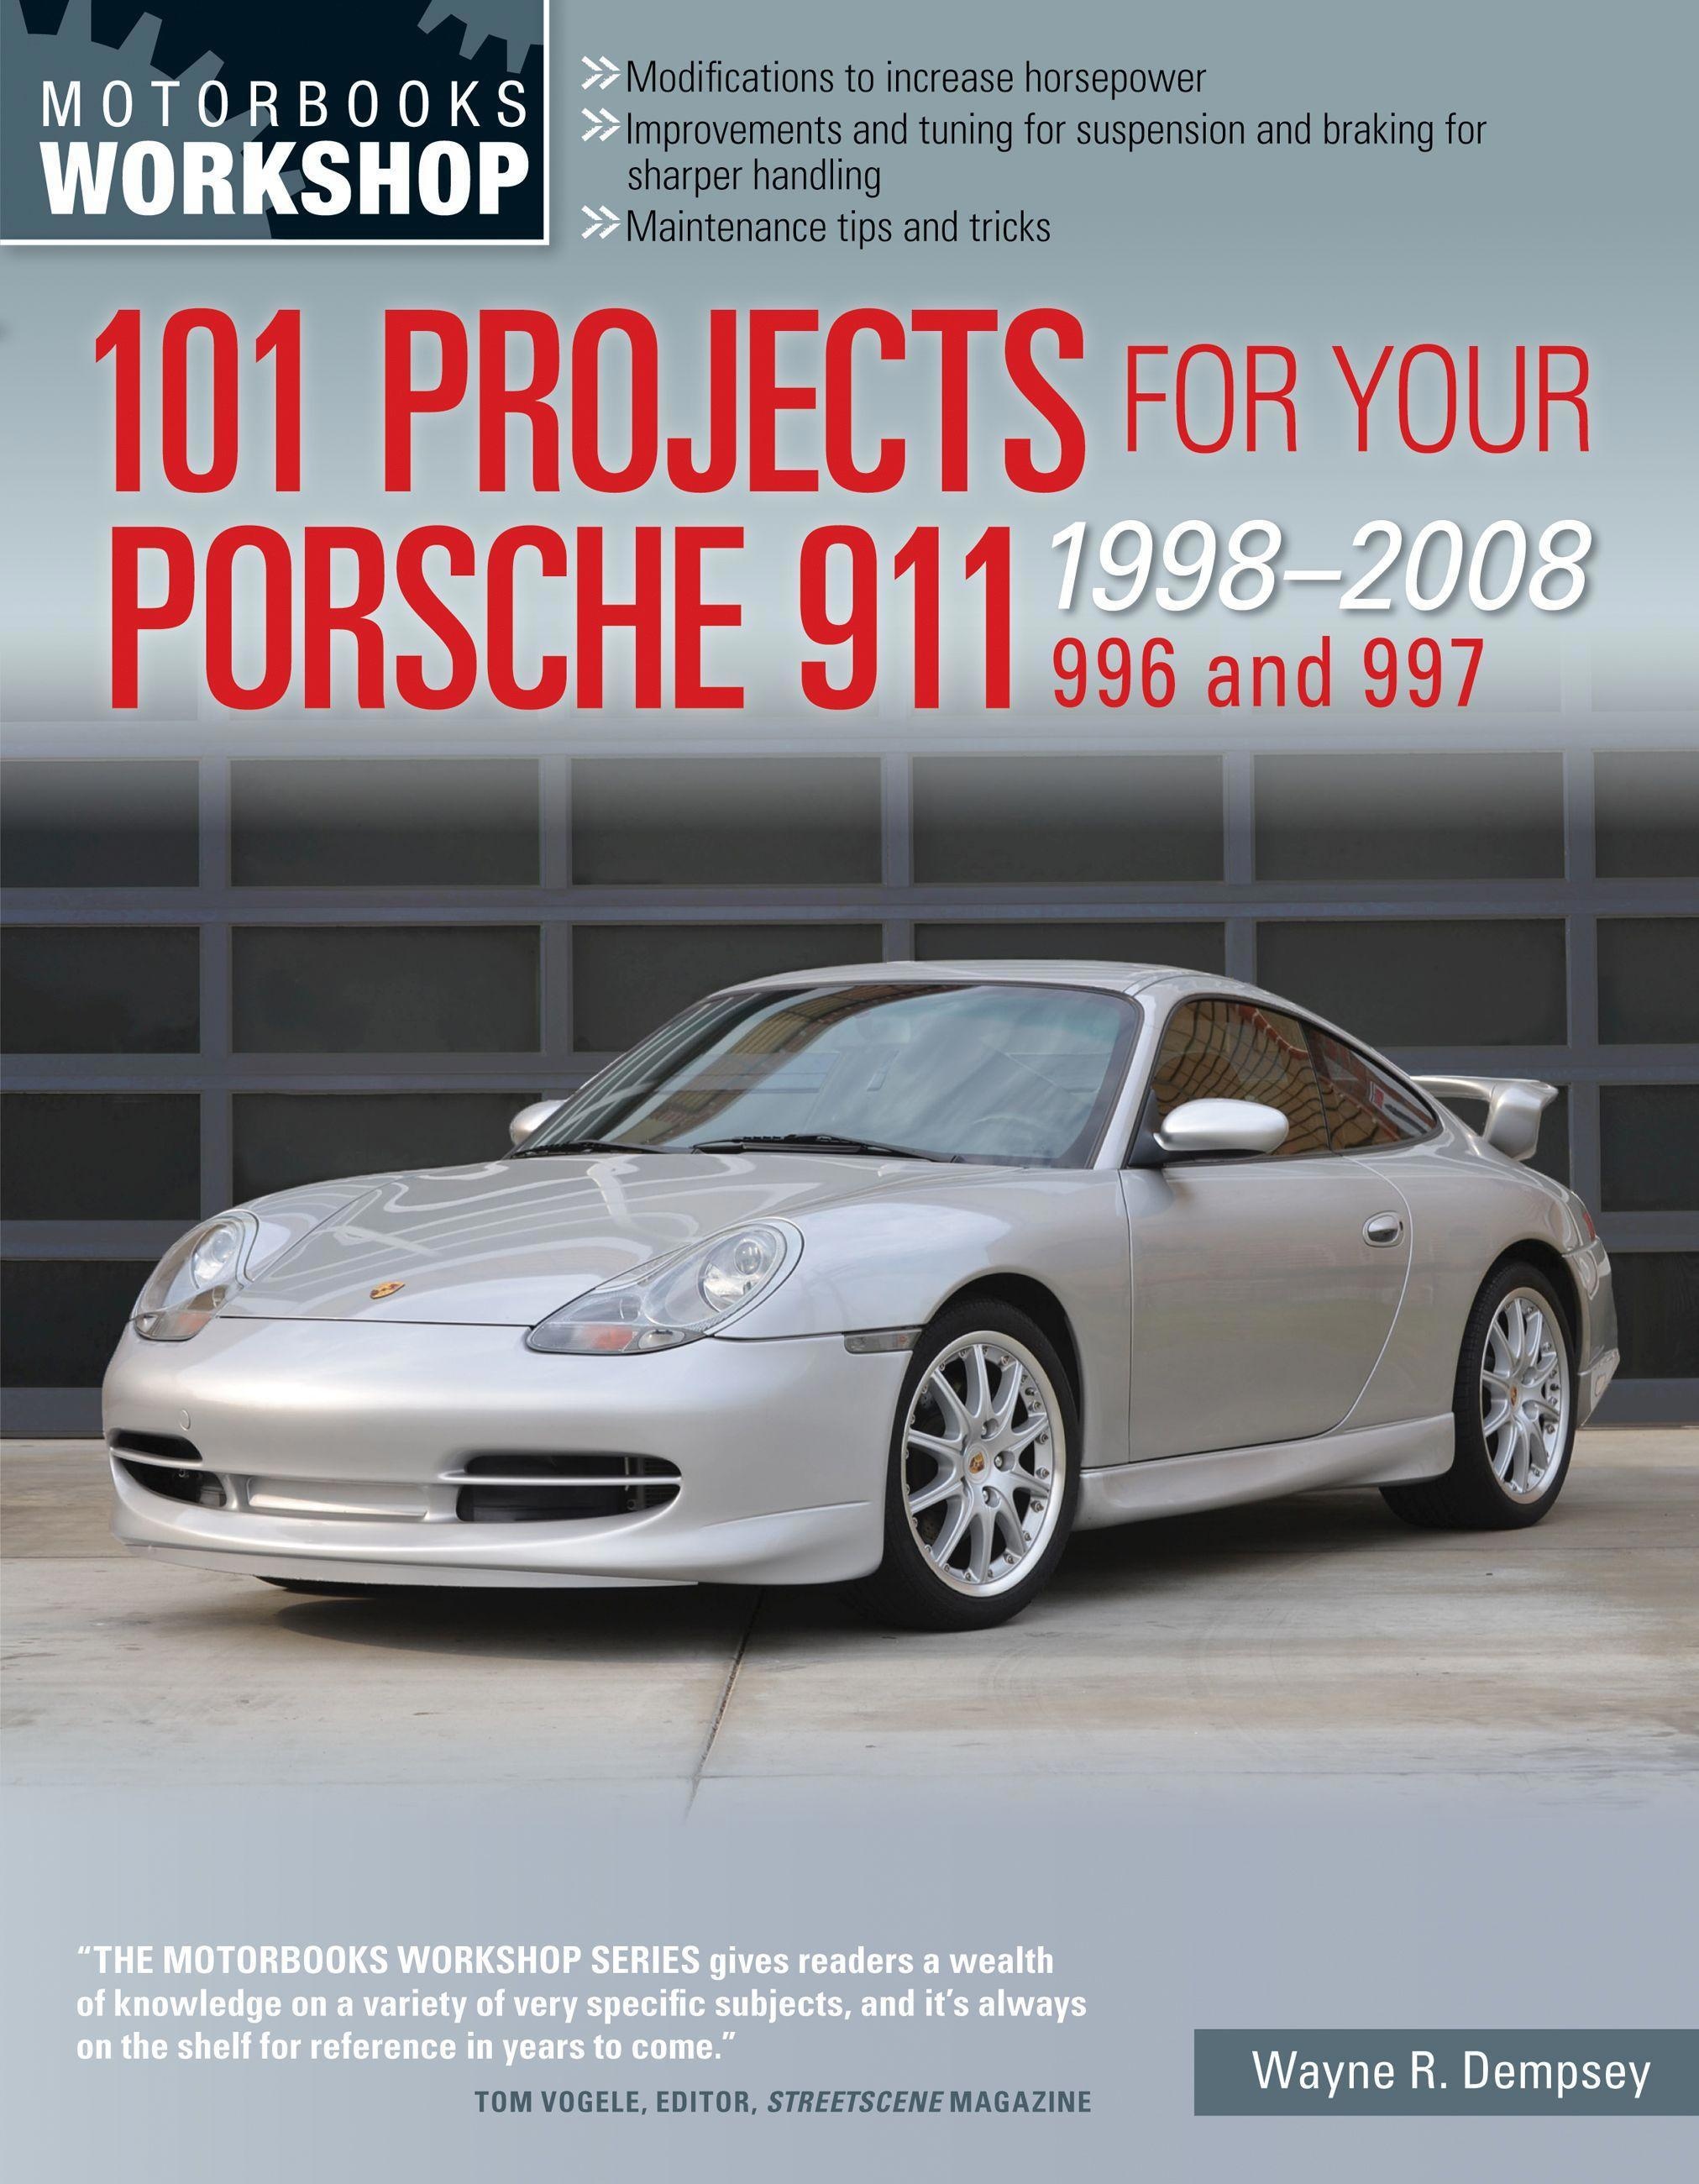 101 Projects for Your Porsche 911 996 and 997 1998-2008, Ratgeber von Wayne R. Dempsey